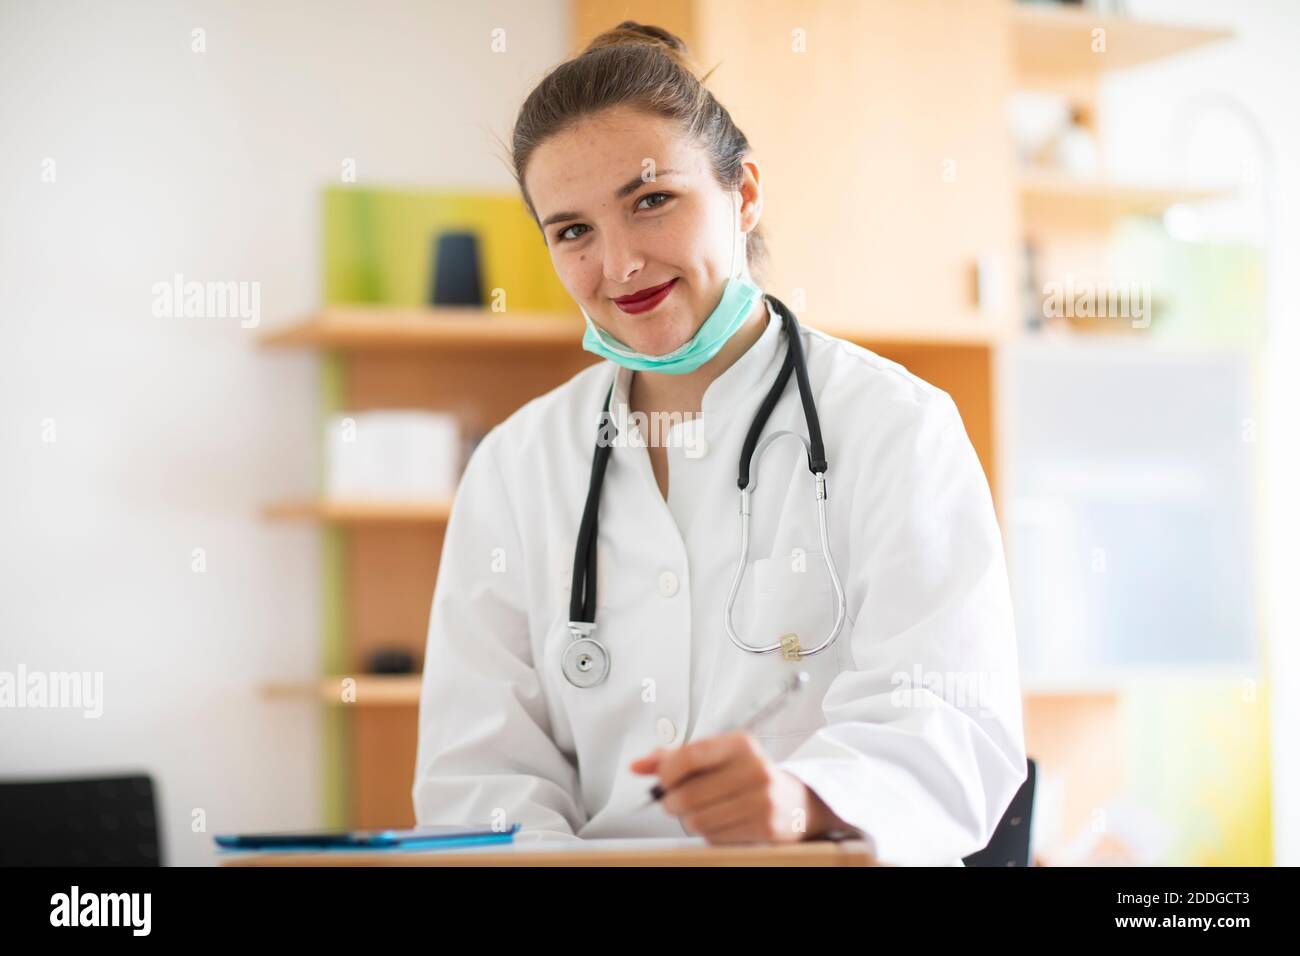 Doctor making notes Stock Photo